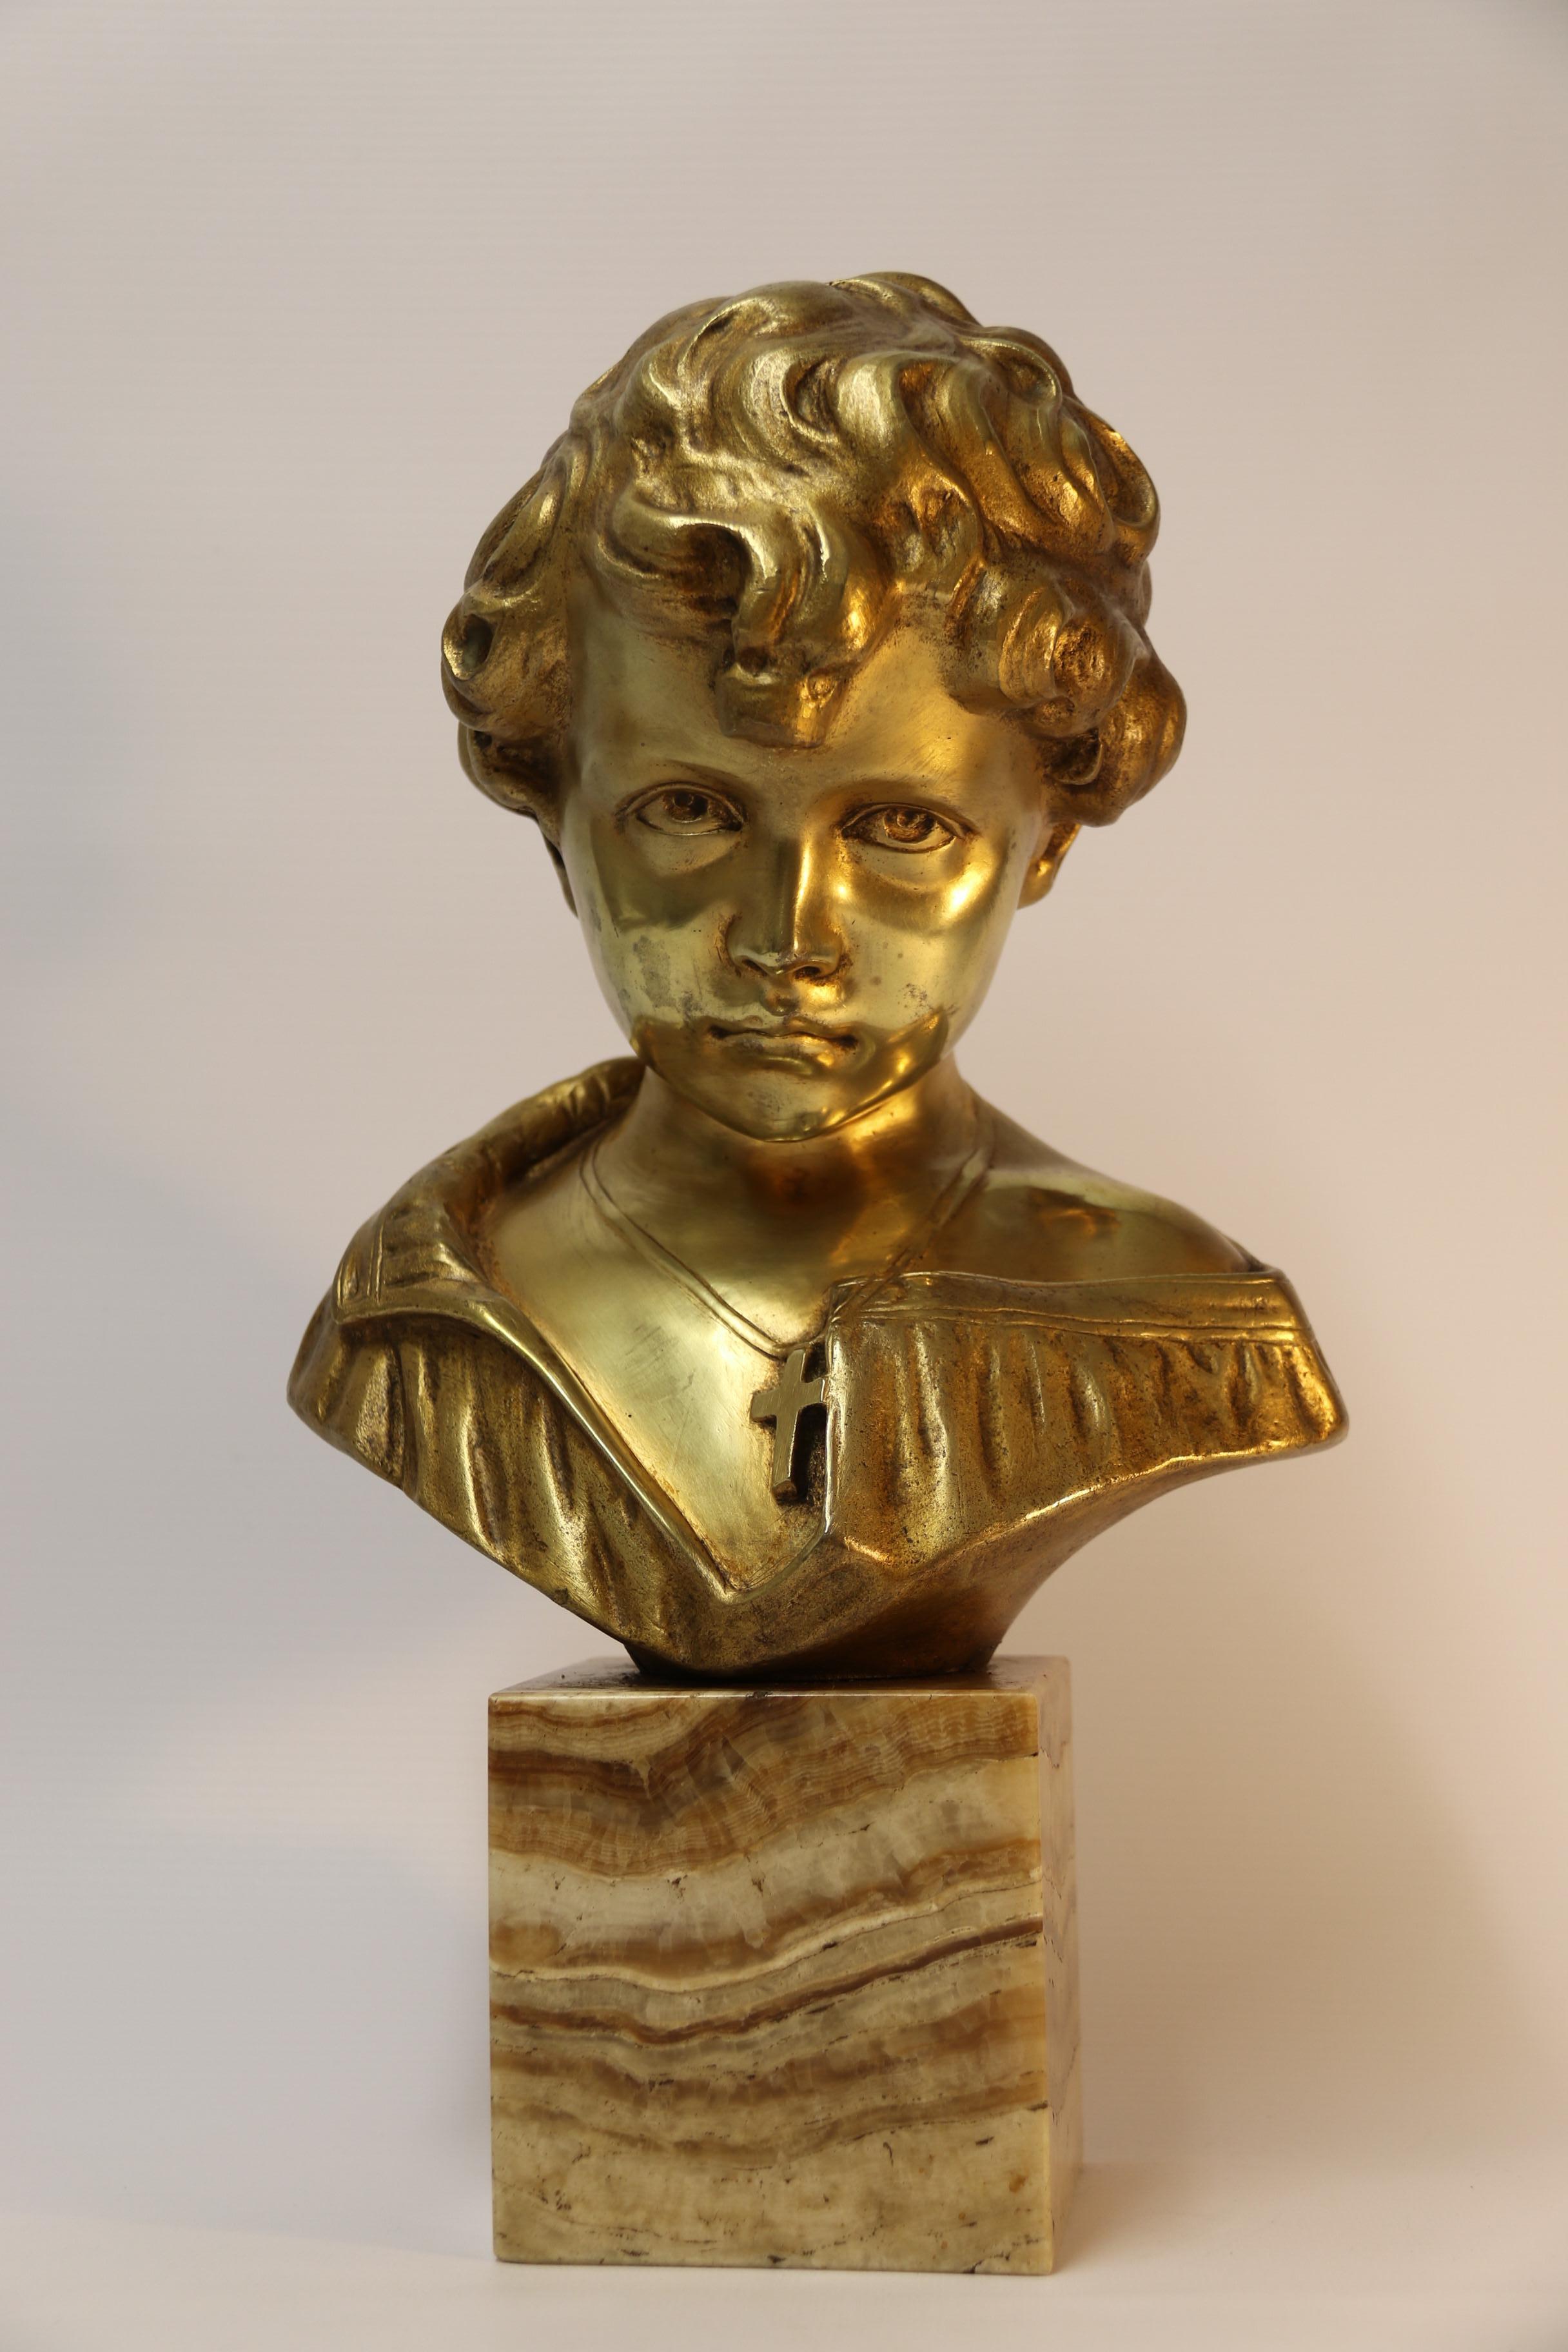 This superb bronze is full of character. It depicts a boy with his head slightly bowed, the eyes are cleverly uplifted which captures great expression.
This piece is cast with good detail with a rich gilt finish and is mounted on a block of